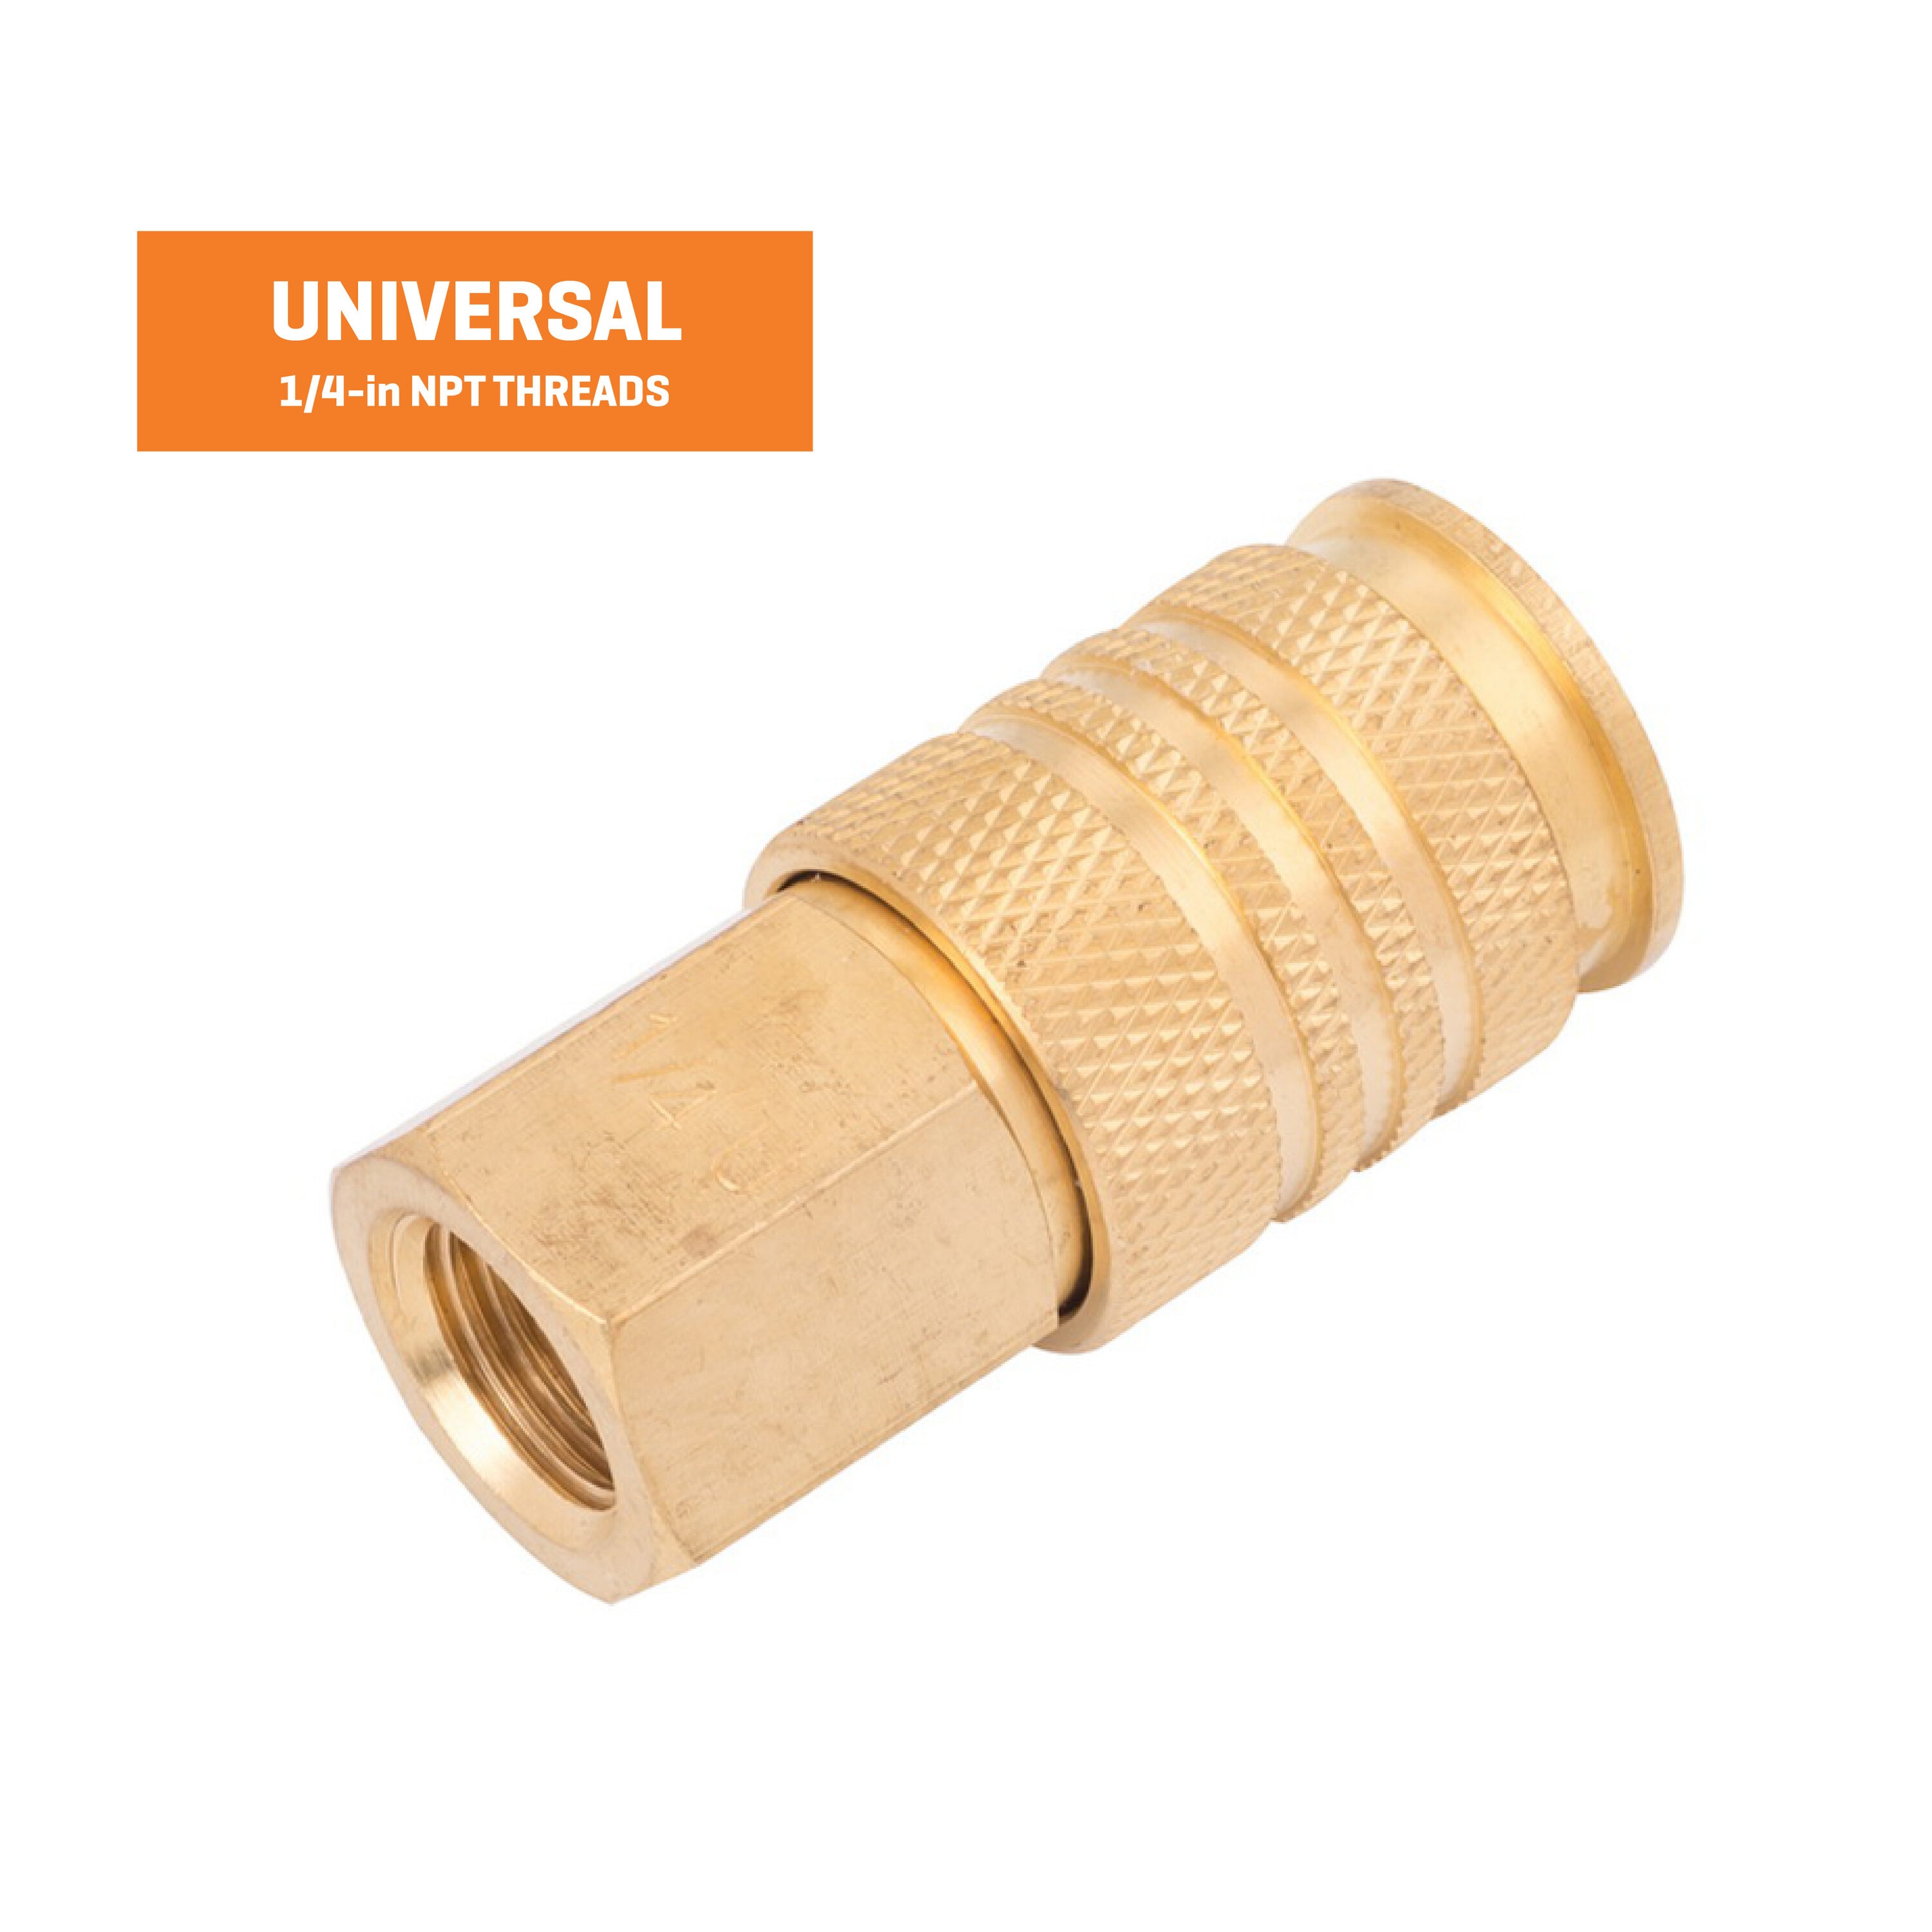 Universal Air Conditioner Exhaust Hose Coupler Coupling Connector